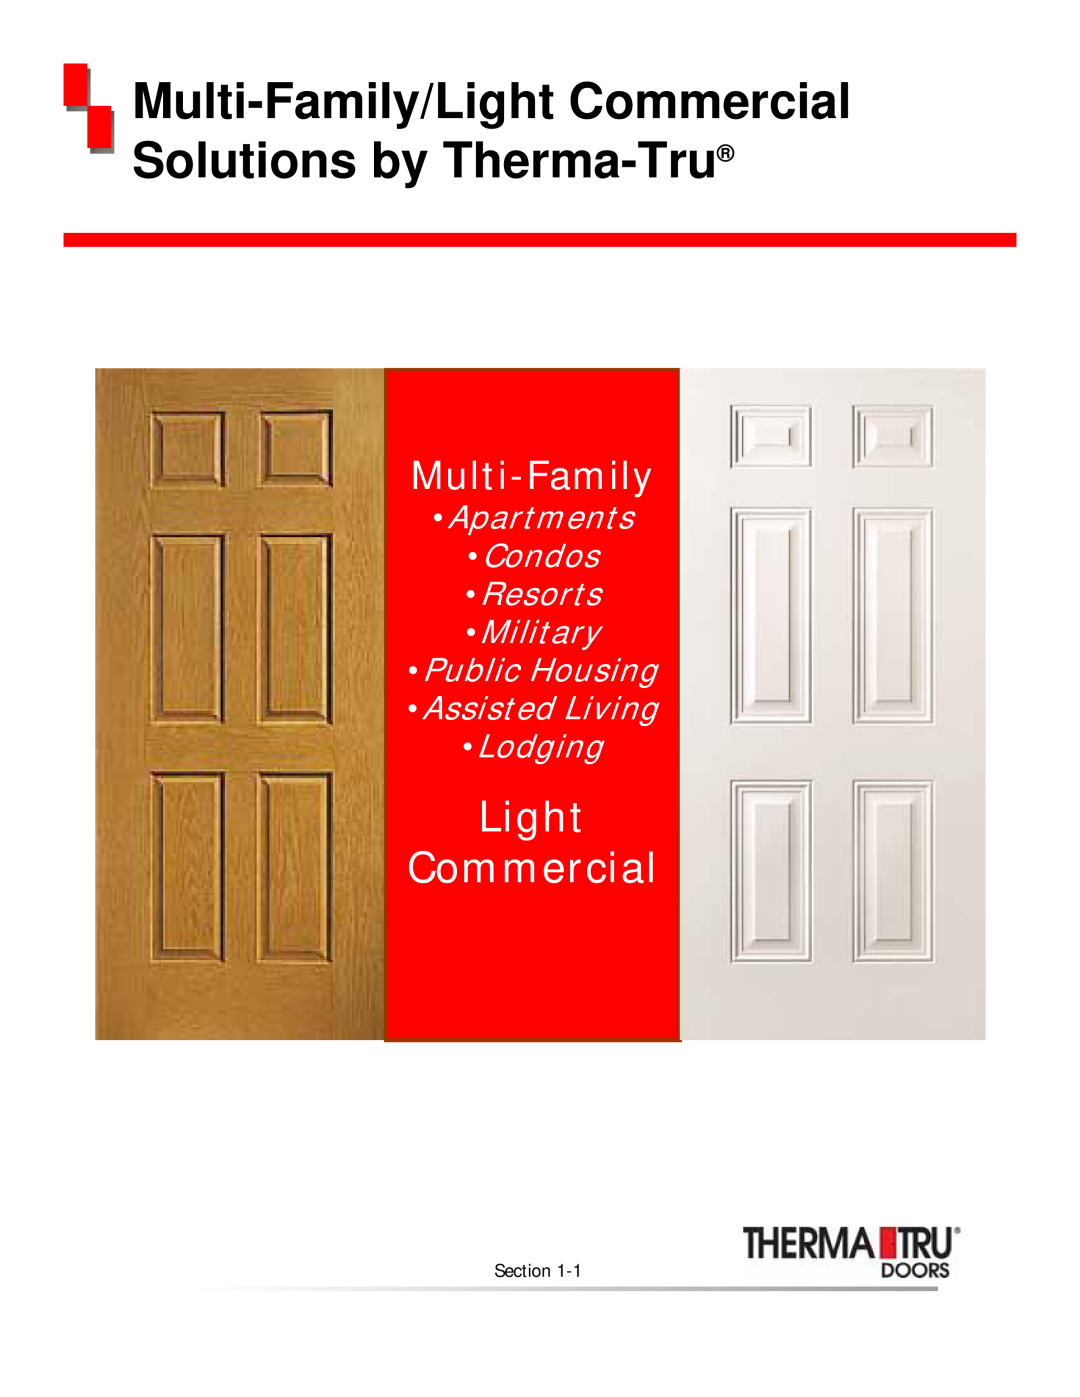 Therma-Tru none manual Light Commercial, Multi-Family, Apartments Condos Resorts Military, Section 